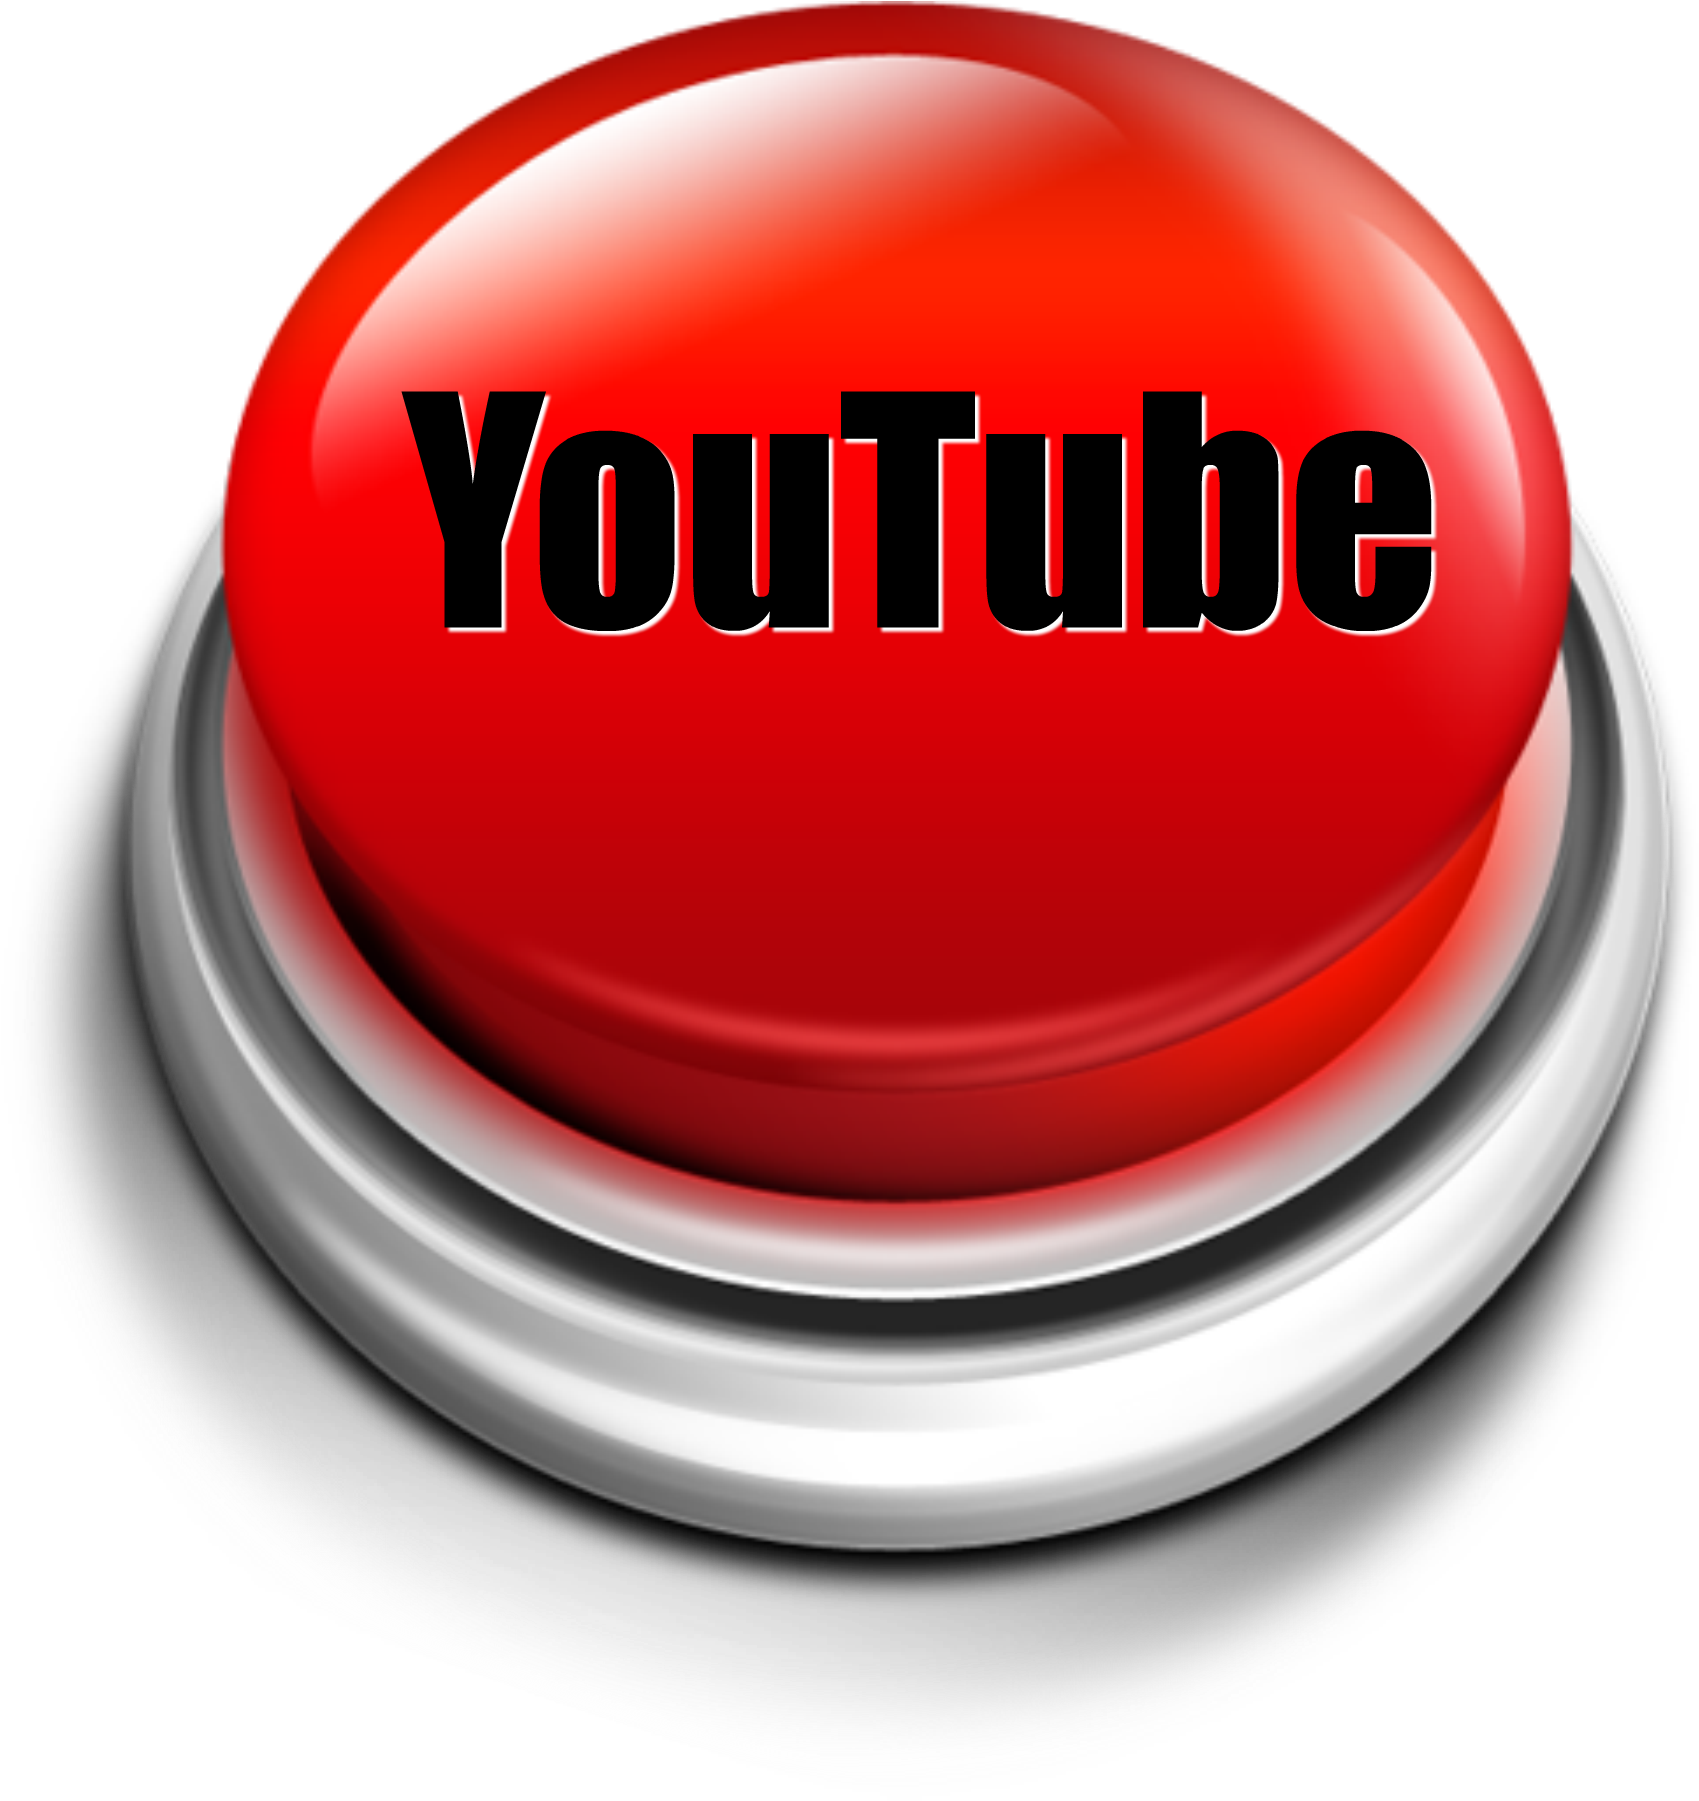 A Red Button With Black Text